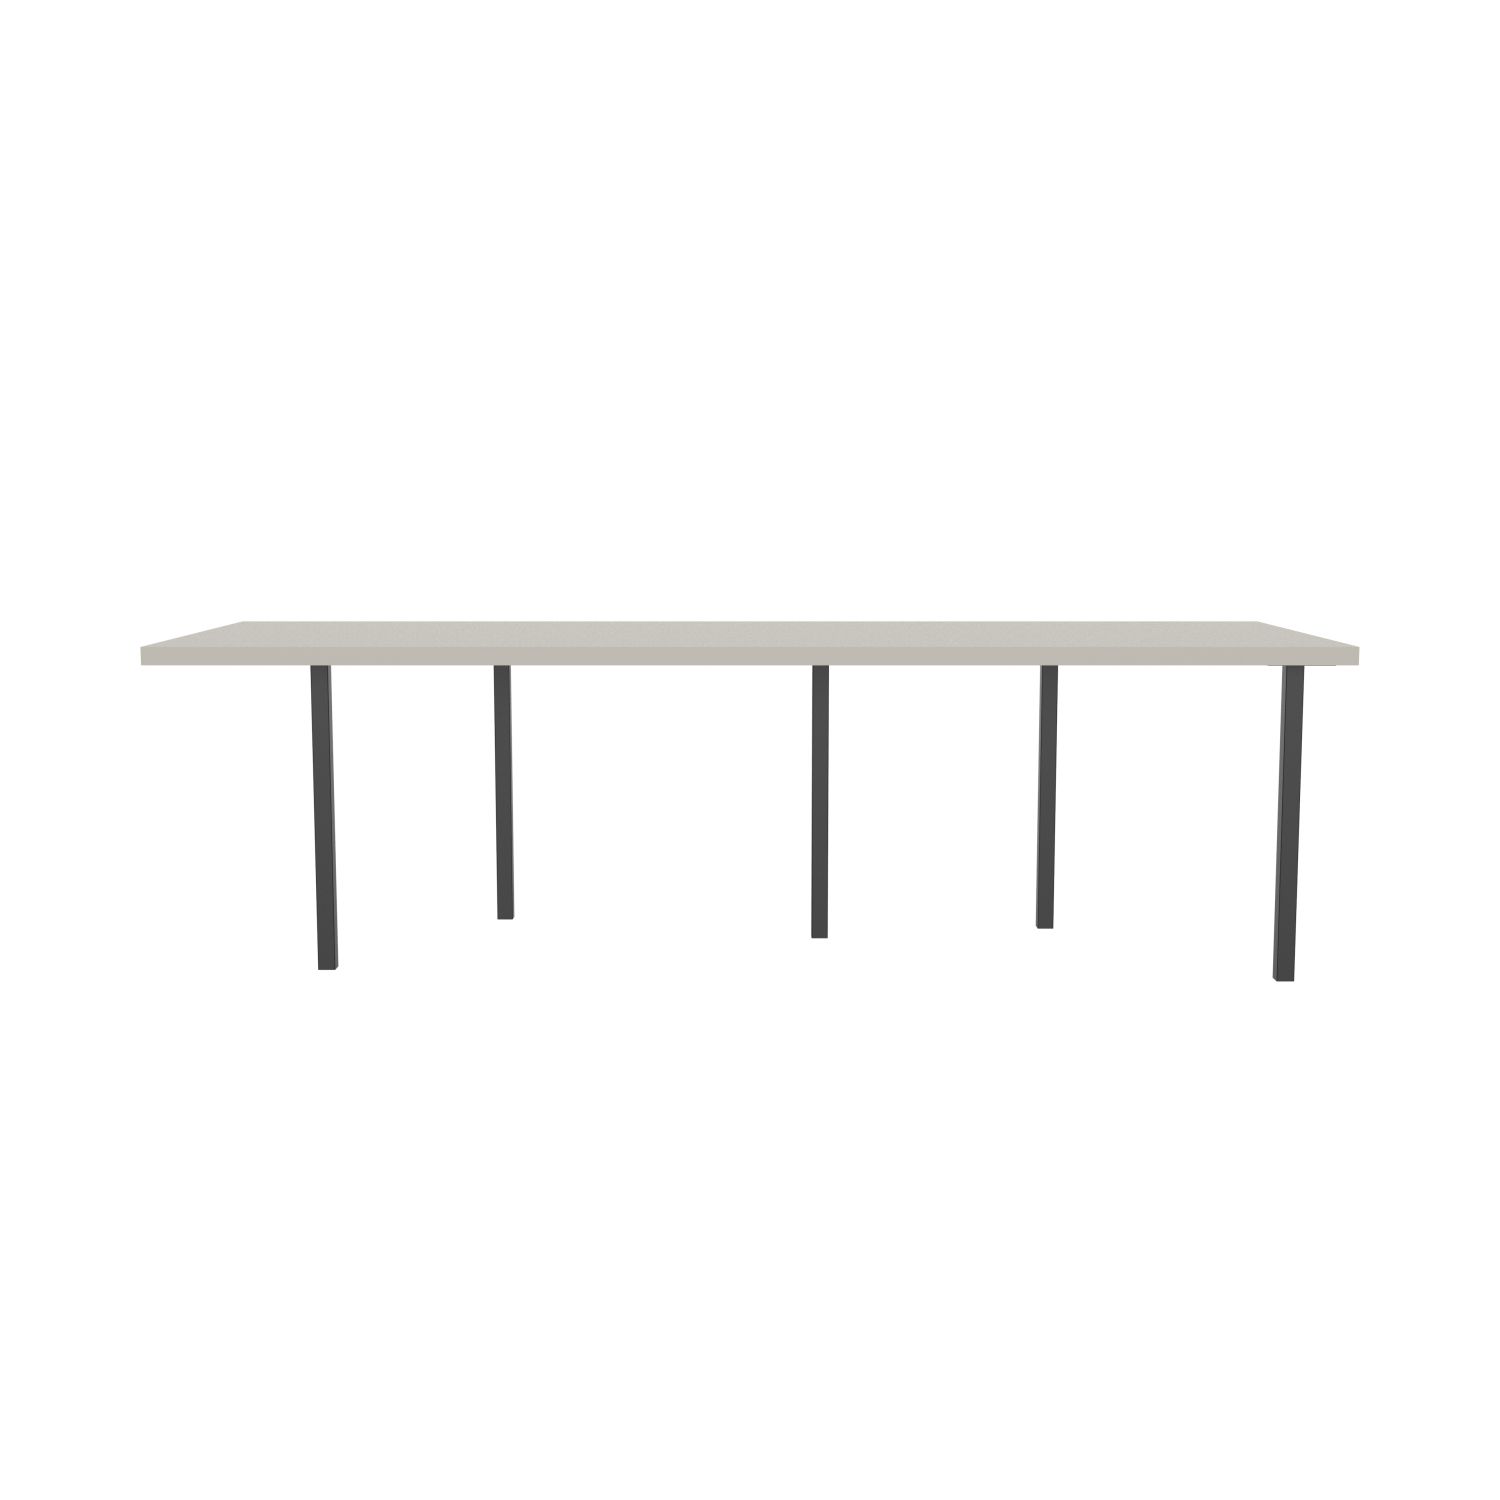 lensvelt bbrand table five fixed heigt 915x264 hpl white 50 mm price level 1 black ral9005